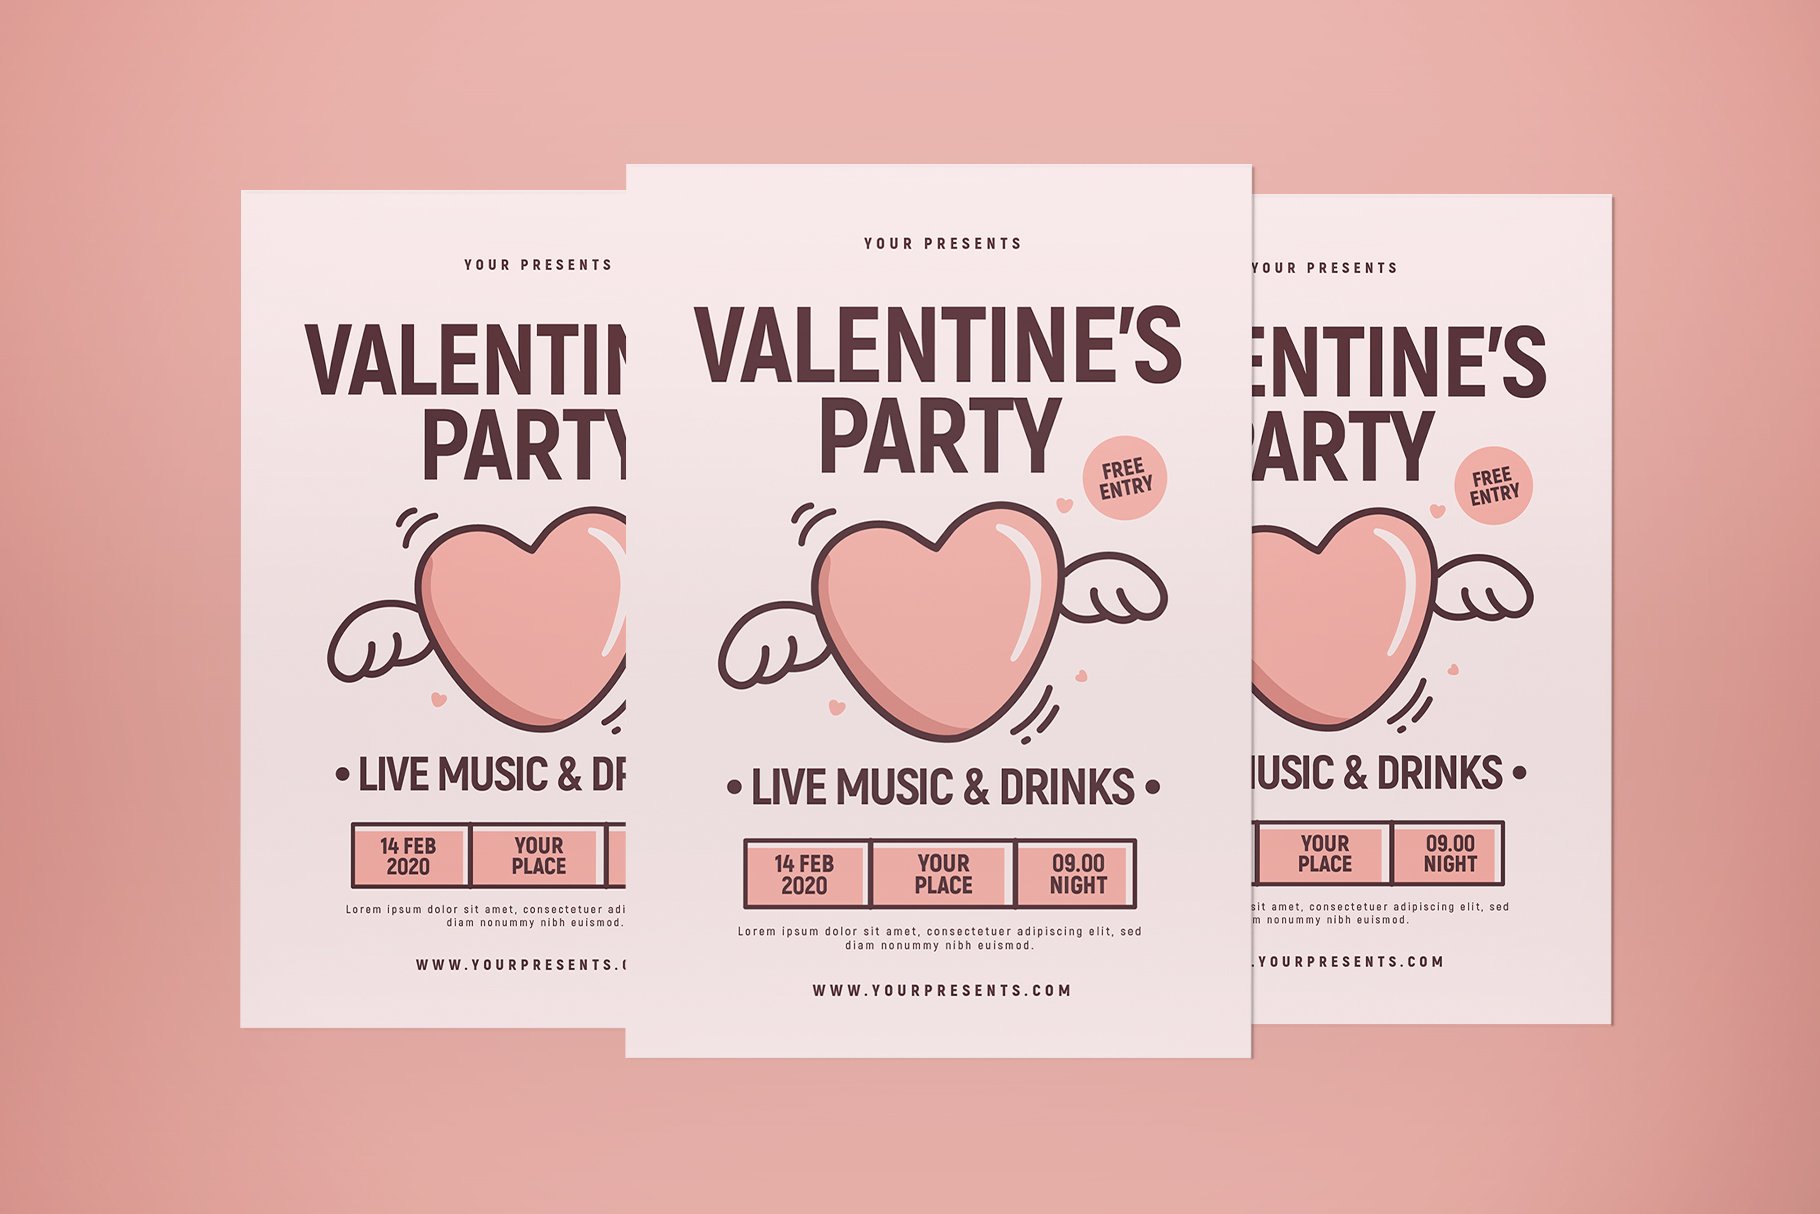 Valentine's Party Flyer cover image.